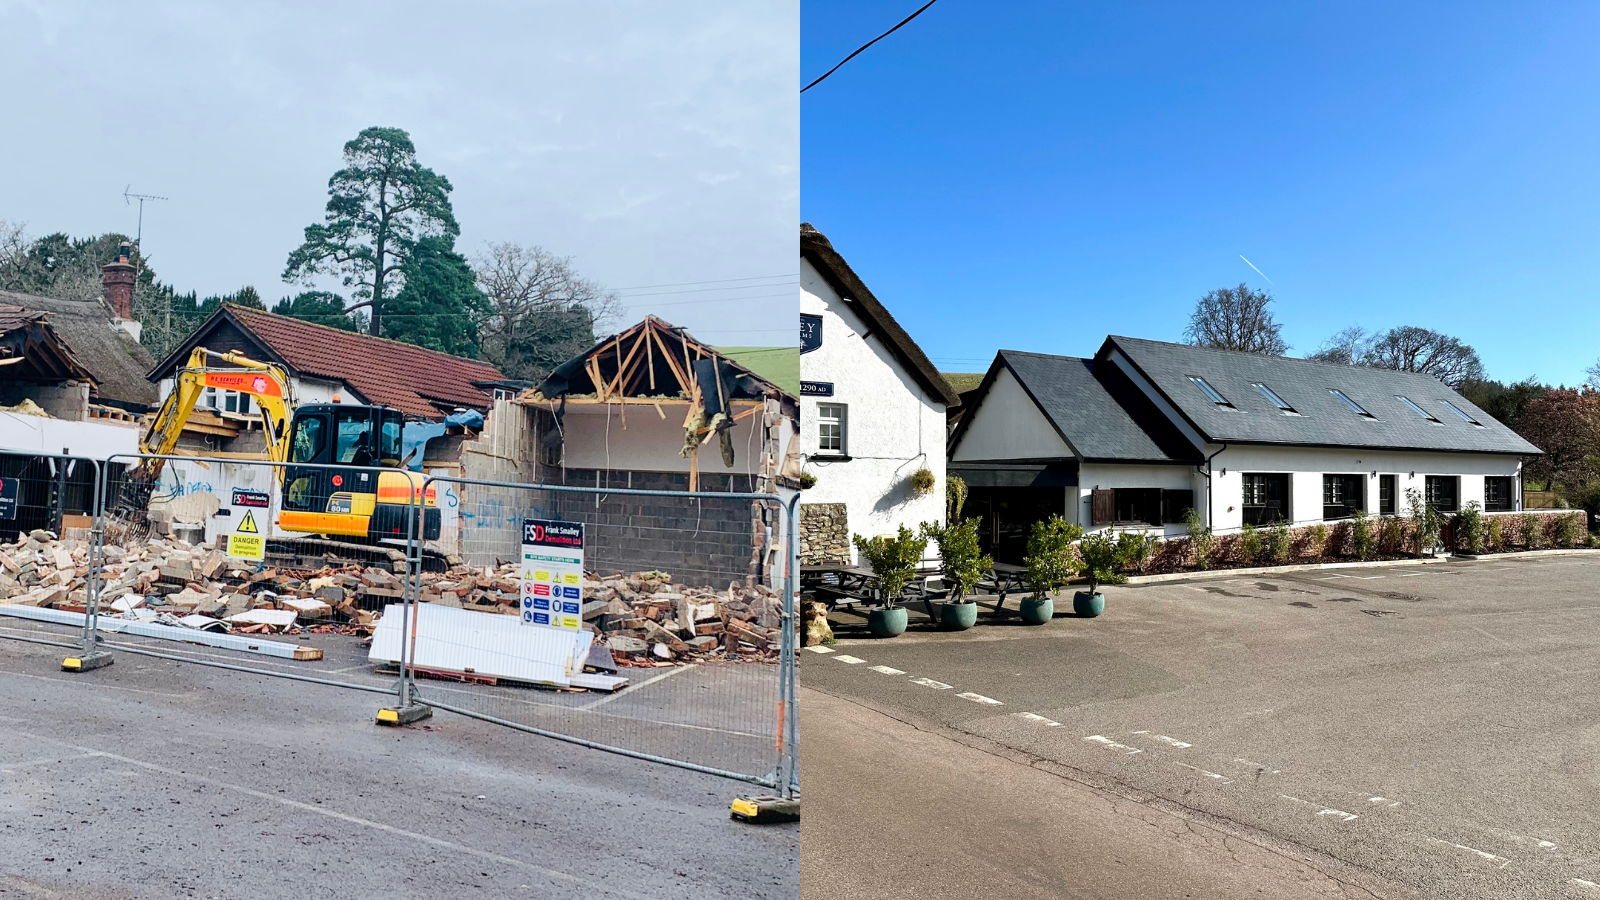 A side by side image showing the exterior of The Ley Arms before and after renovation